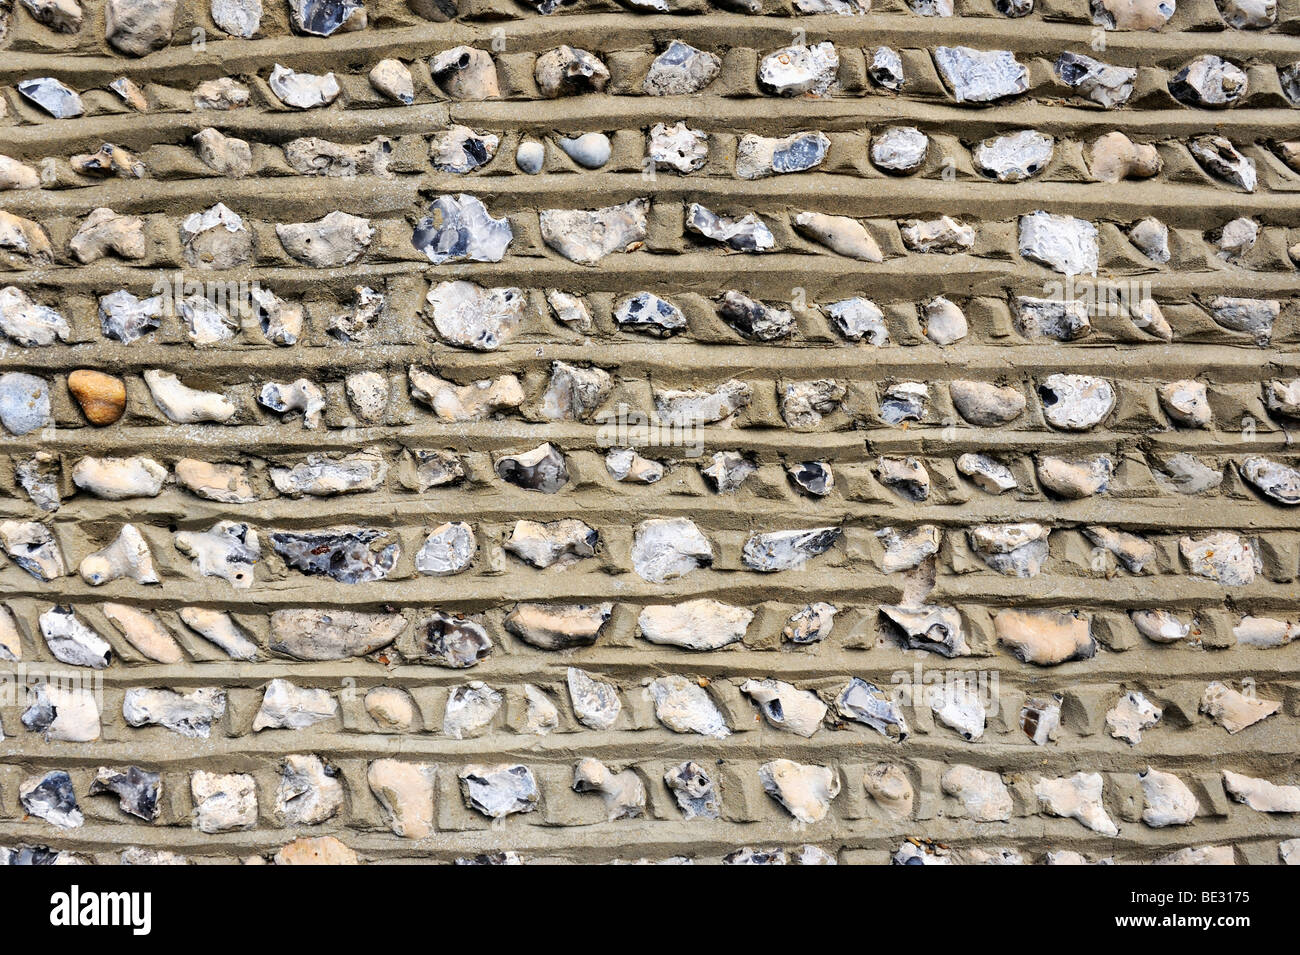 Flint as a building material for the traditional walls and facades in Southern England, England, UK, Europe Stock Photo